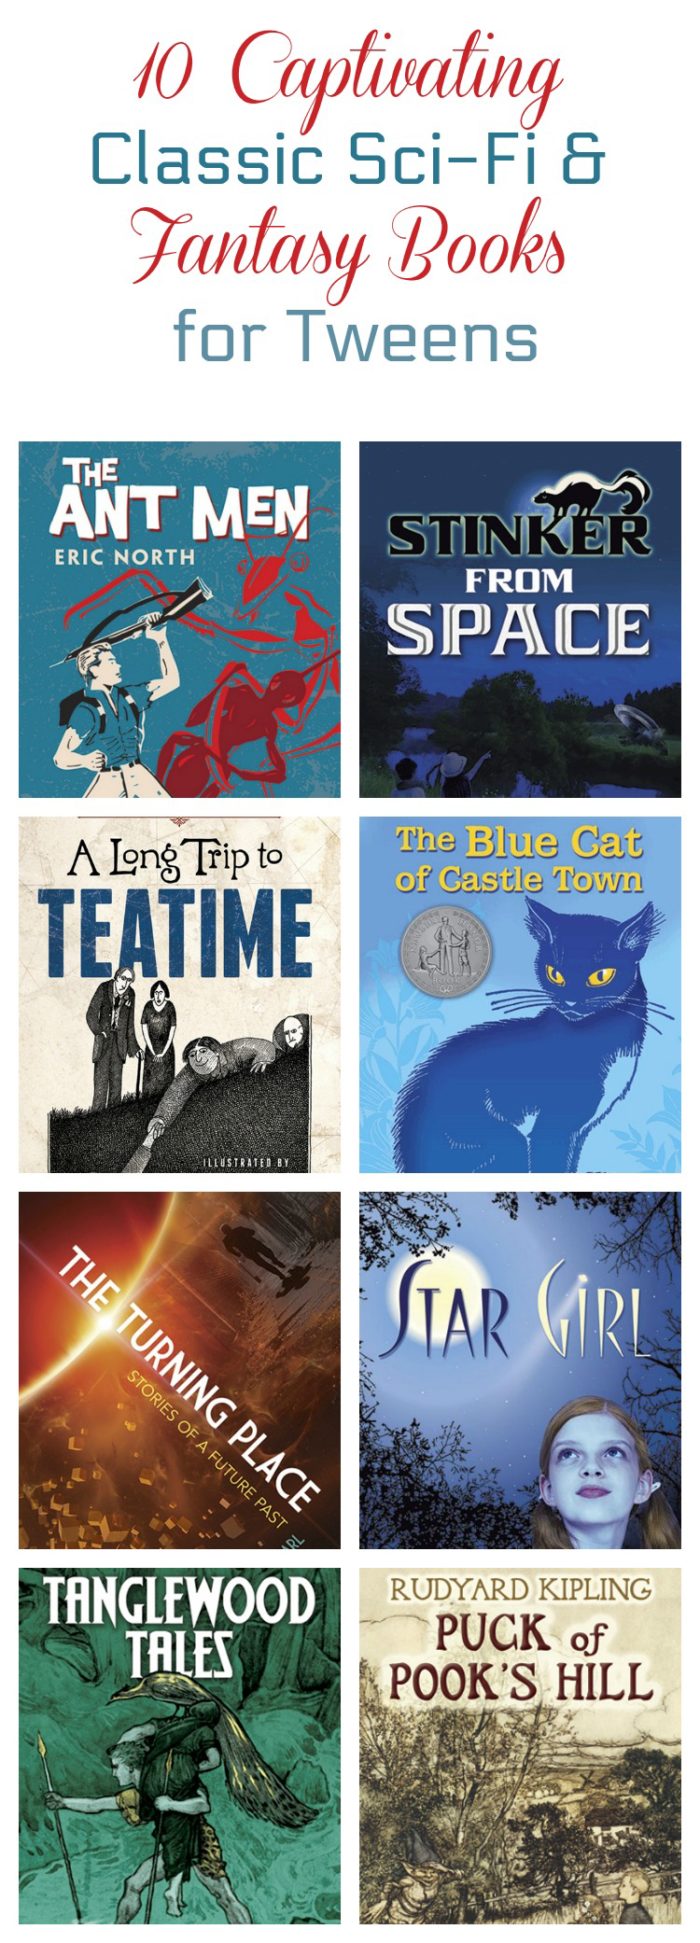 Want to introduce your middle-grade tweens to classic literature? Start with these 10 captivating science fiction and fantasy books from Dover!